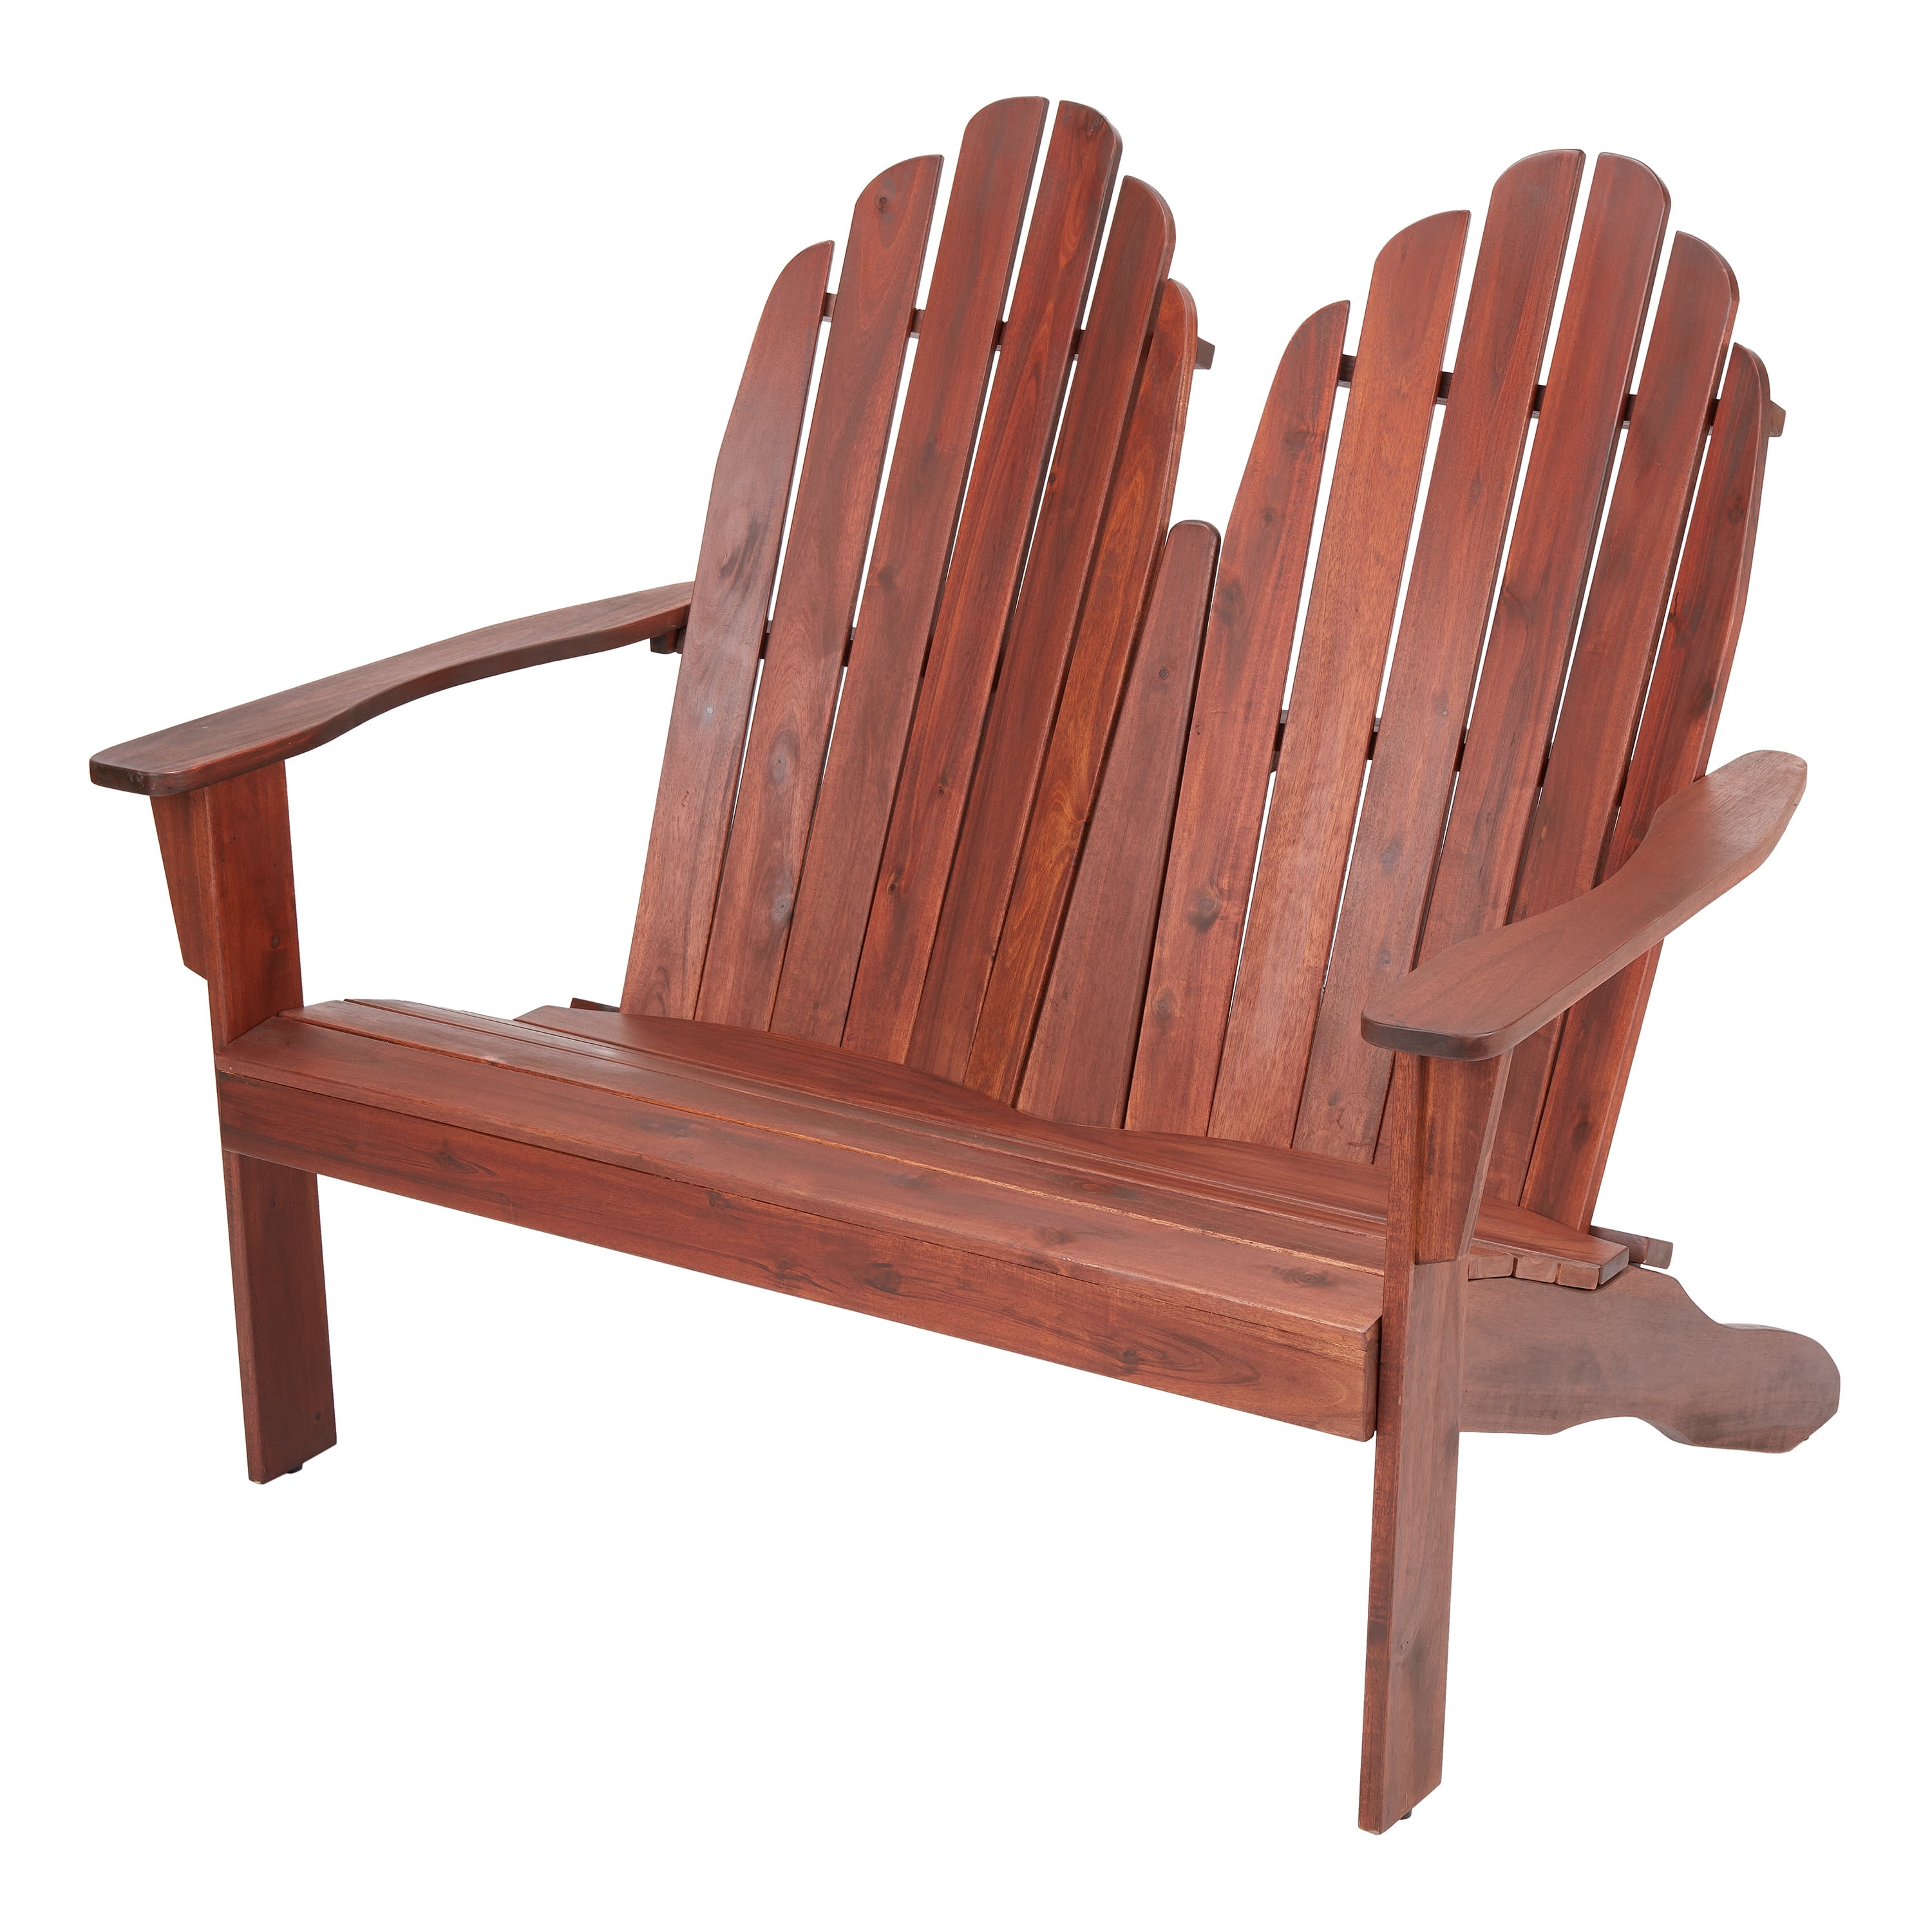 Outsunny 2 Person Fir Wood Rustic Outdoor Patio Adirondack Rocking Chair Bench